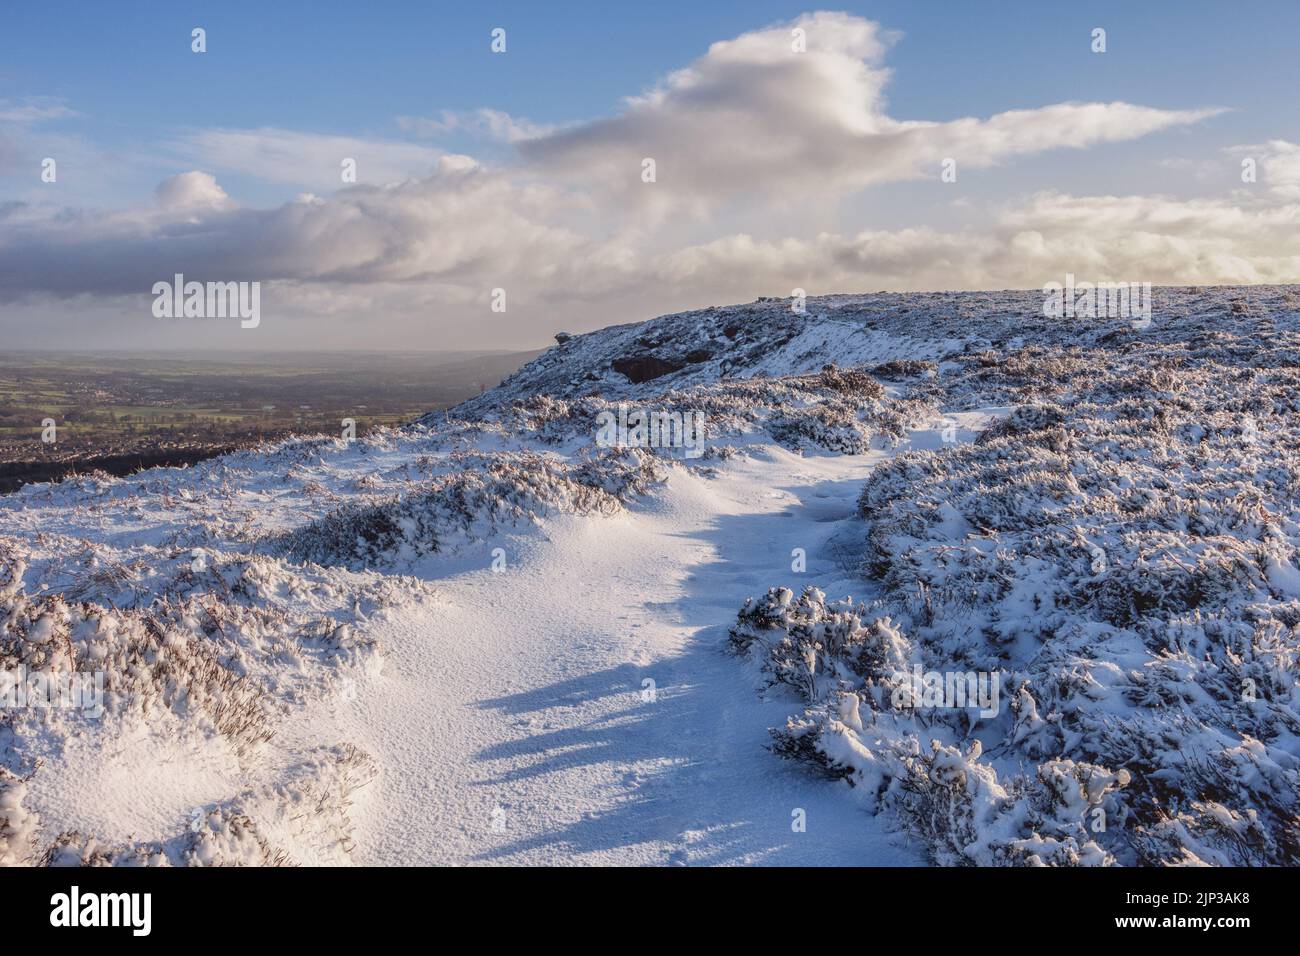 UK Landscapes: Snow at the iconic tourist attraction of Ilkley Moor with the Pancake Stone ahead following the snowy path, West Yorkshire, England, UK Stock Photo